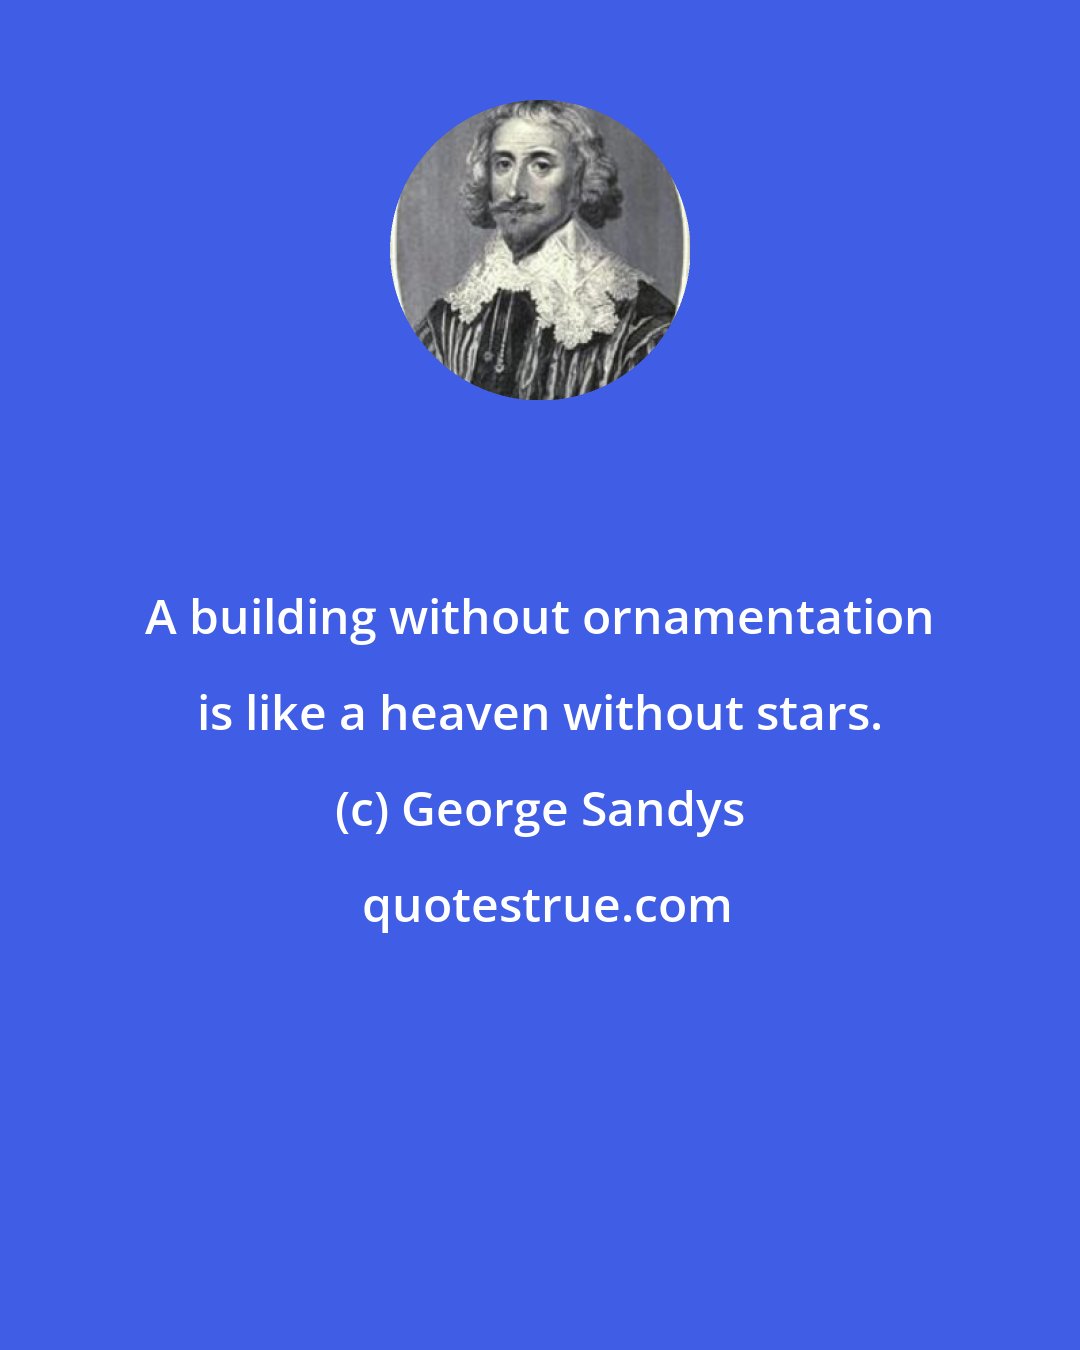 George Sandys: A building without ornamentation is like a heaven without stars.